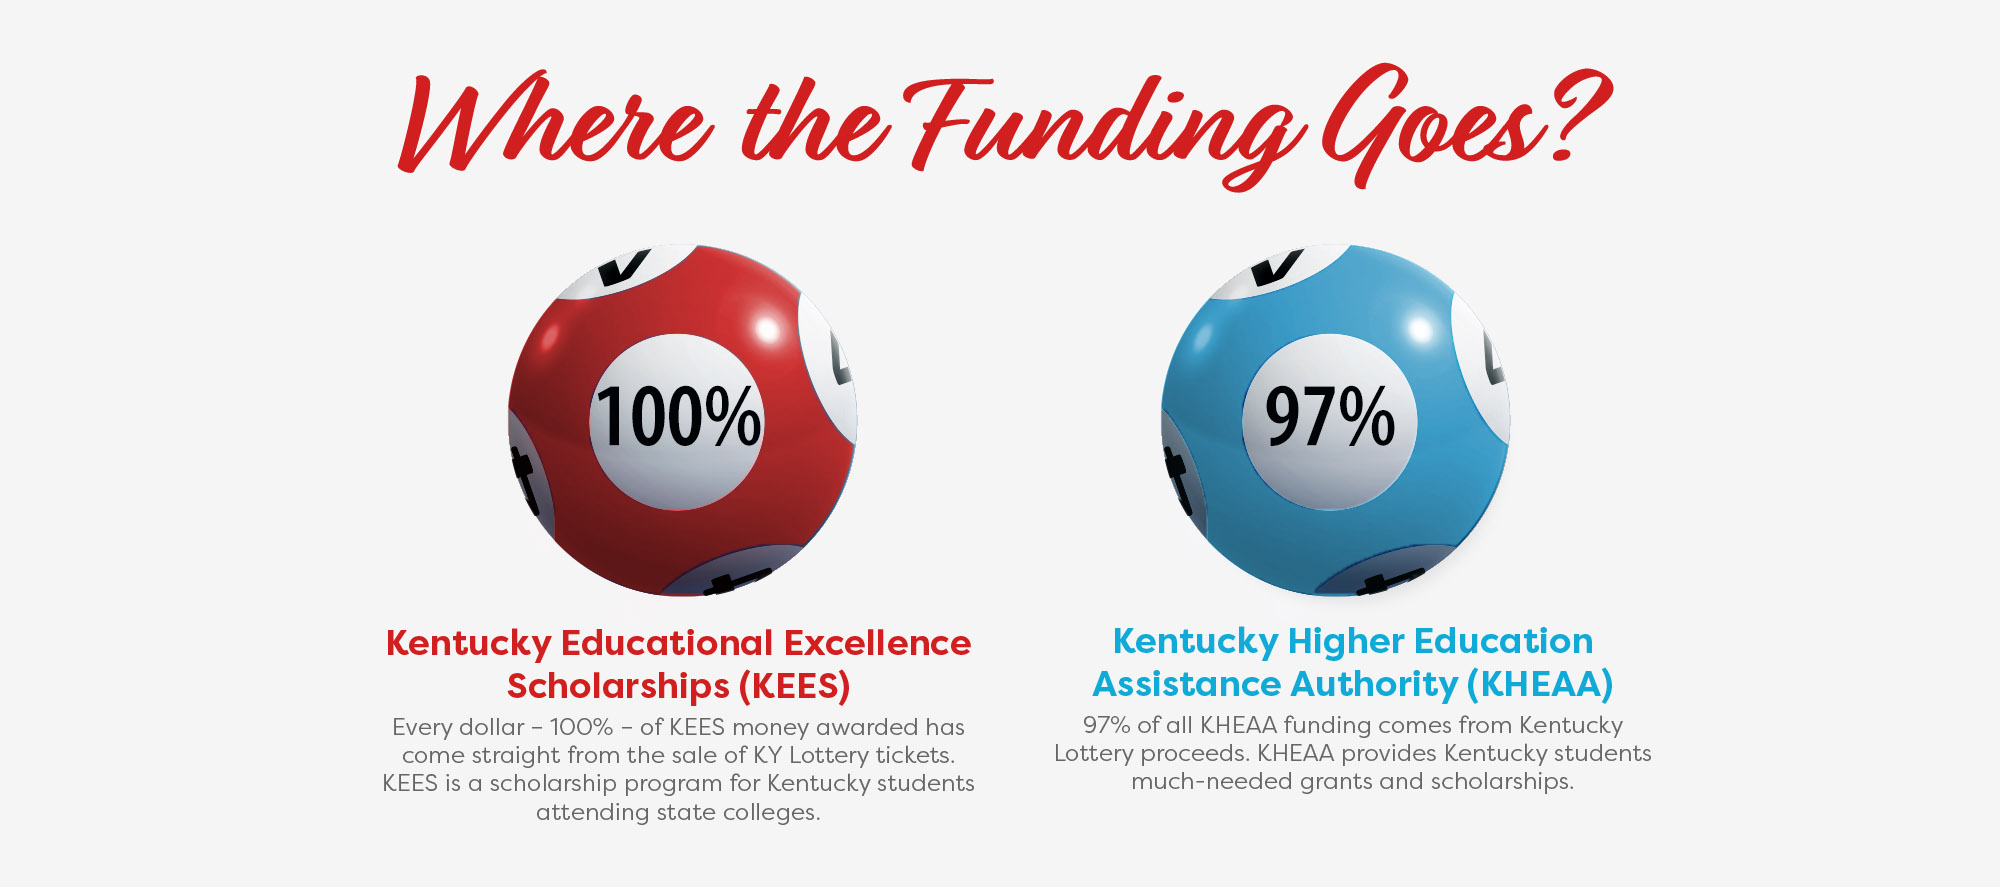 Where's the funding go? 100% of KEES and more than 98% of KHEAA